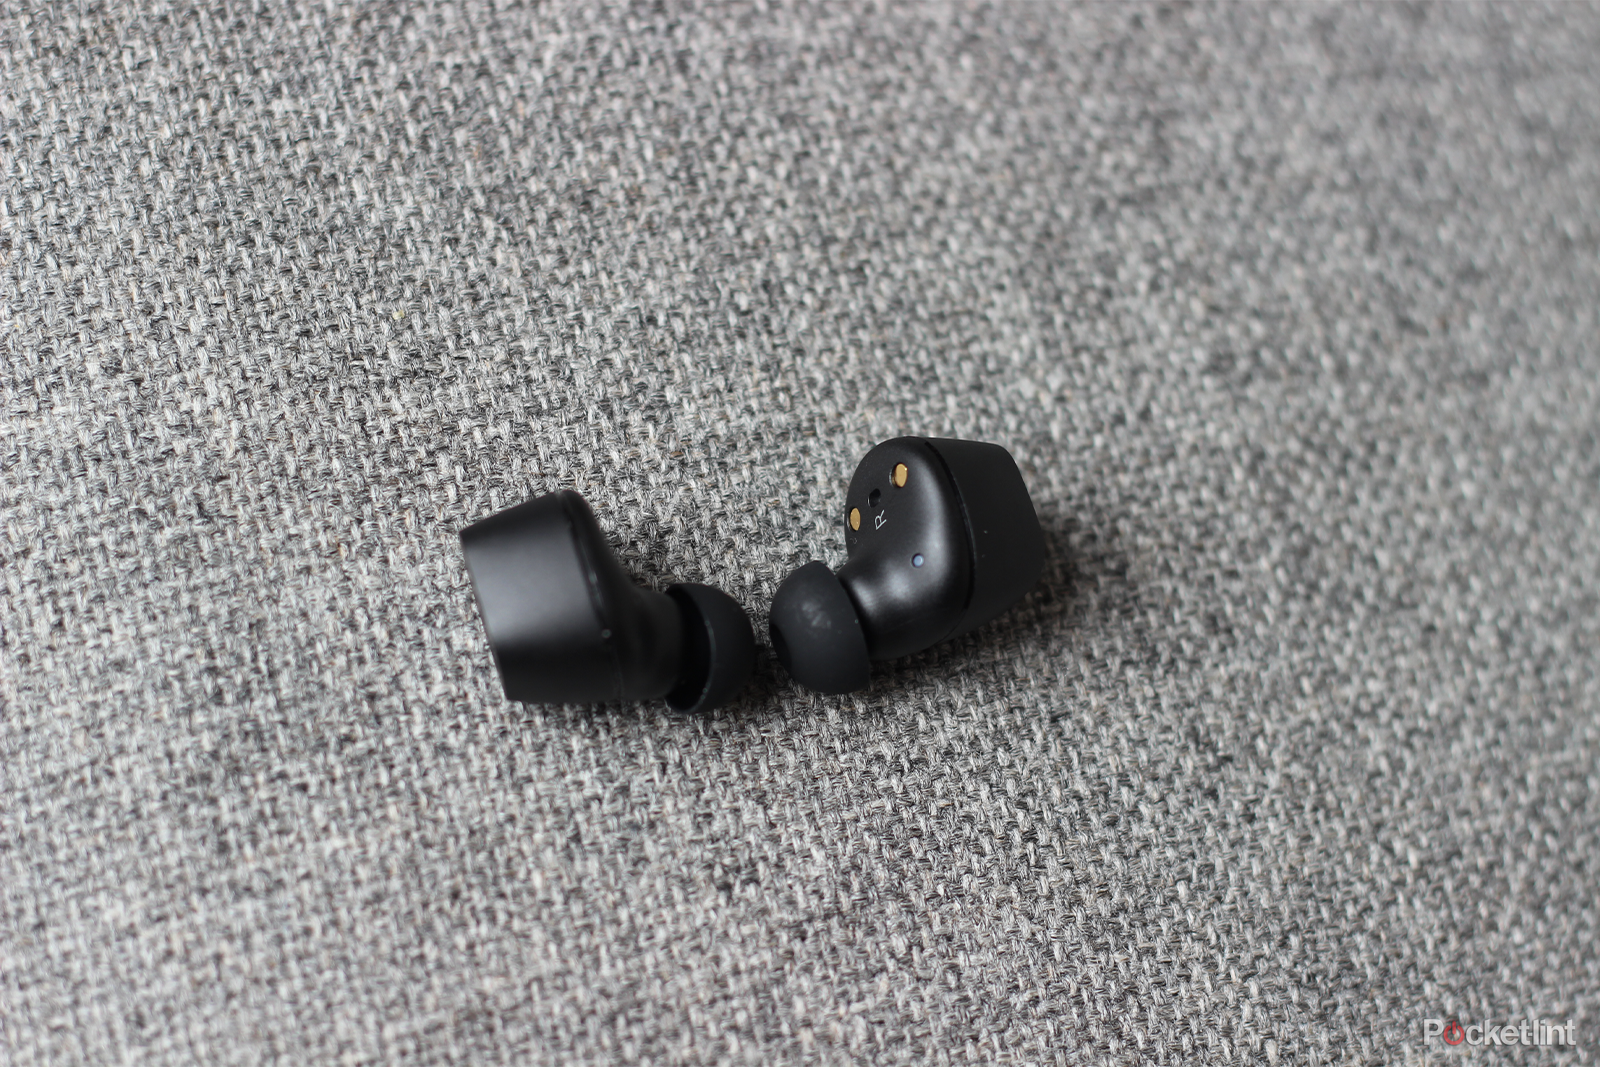 Sennheiser CX True Wireless earbuds review: One for the bargain hunters photo 3